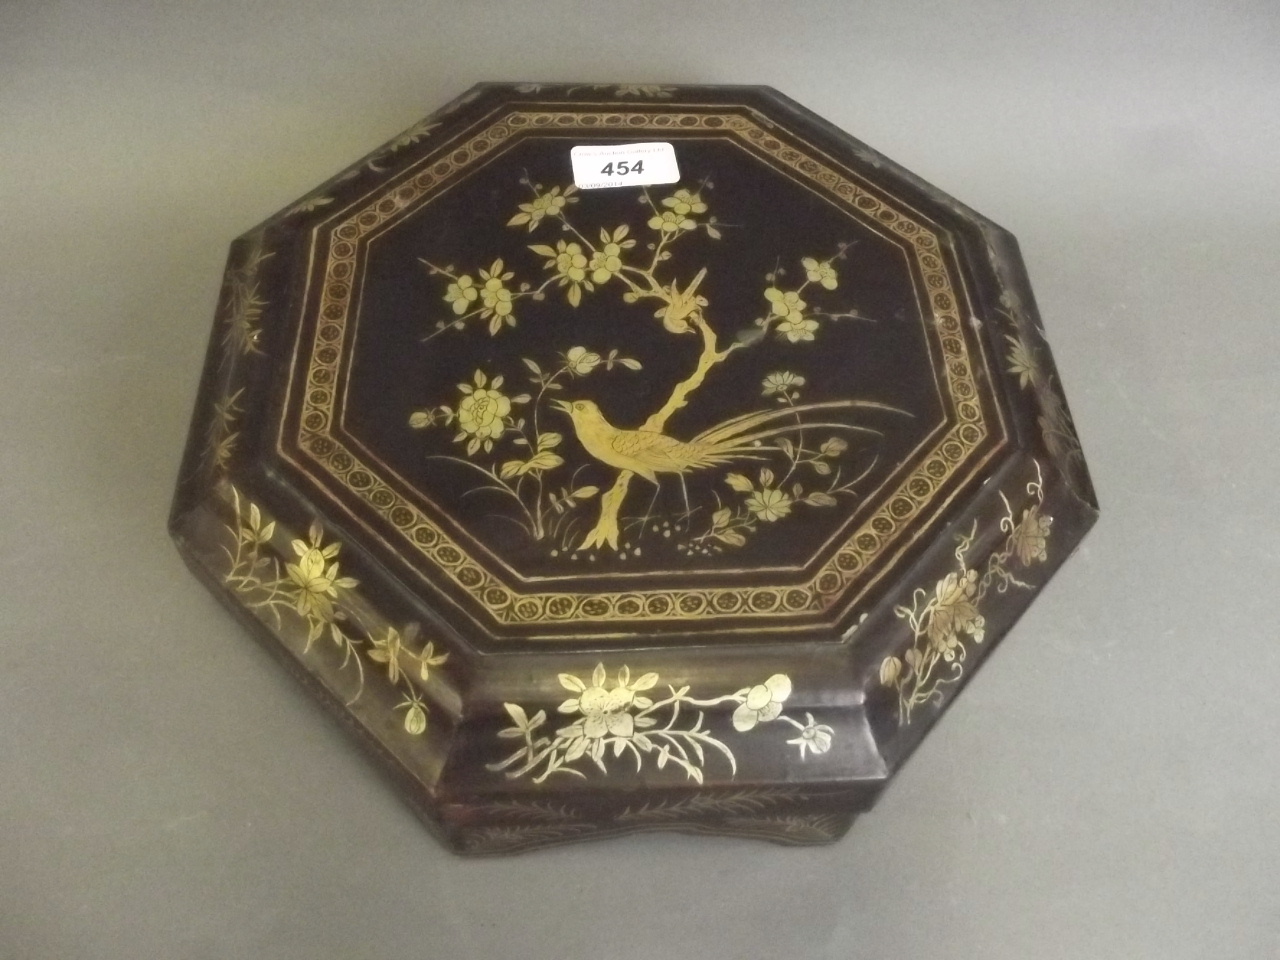 A Chinese octagonal lacquer box containing a set of Cantonese enamelled copper serving dishes, 11½